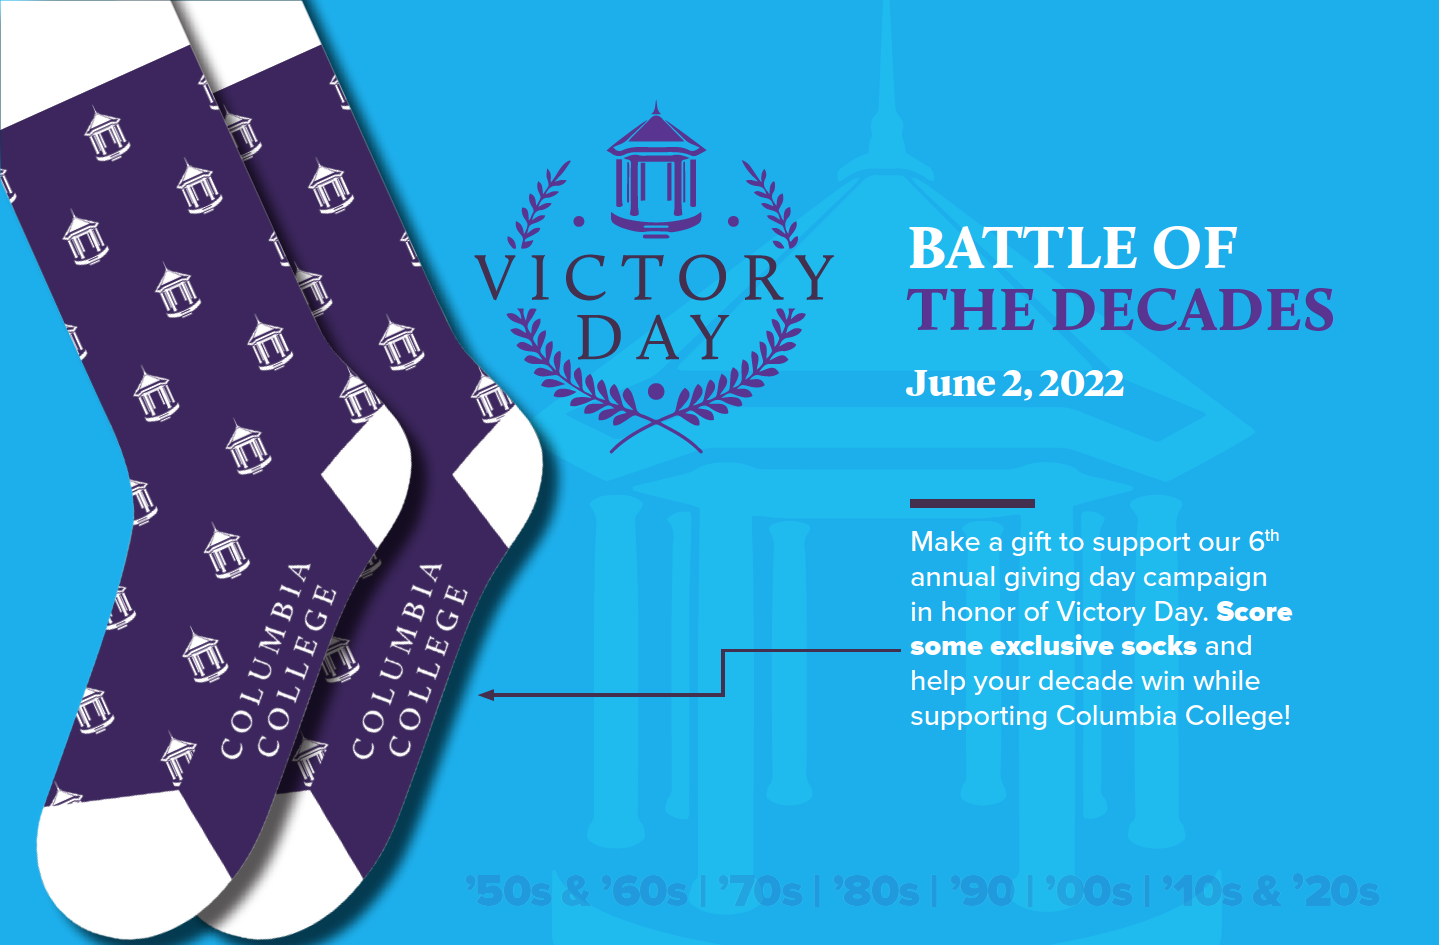 Battle of the Decades on June 2, 2022 - make a gift to support our 6th annual giving day campaign in honor of Victory Day. Score some exclusive socks and help your decade win while supporting Columbia College!